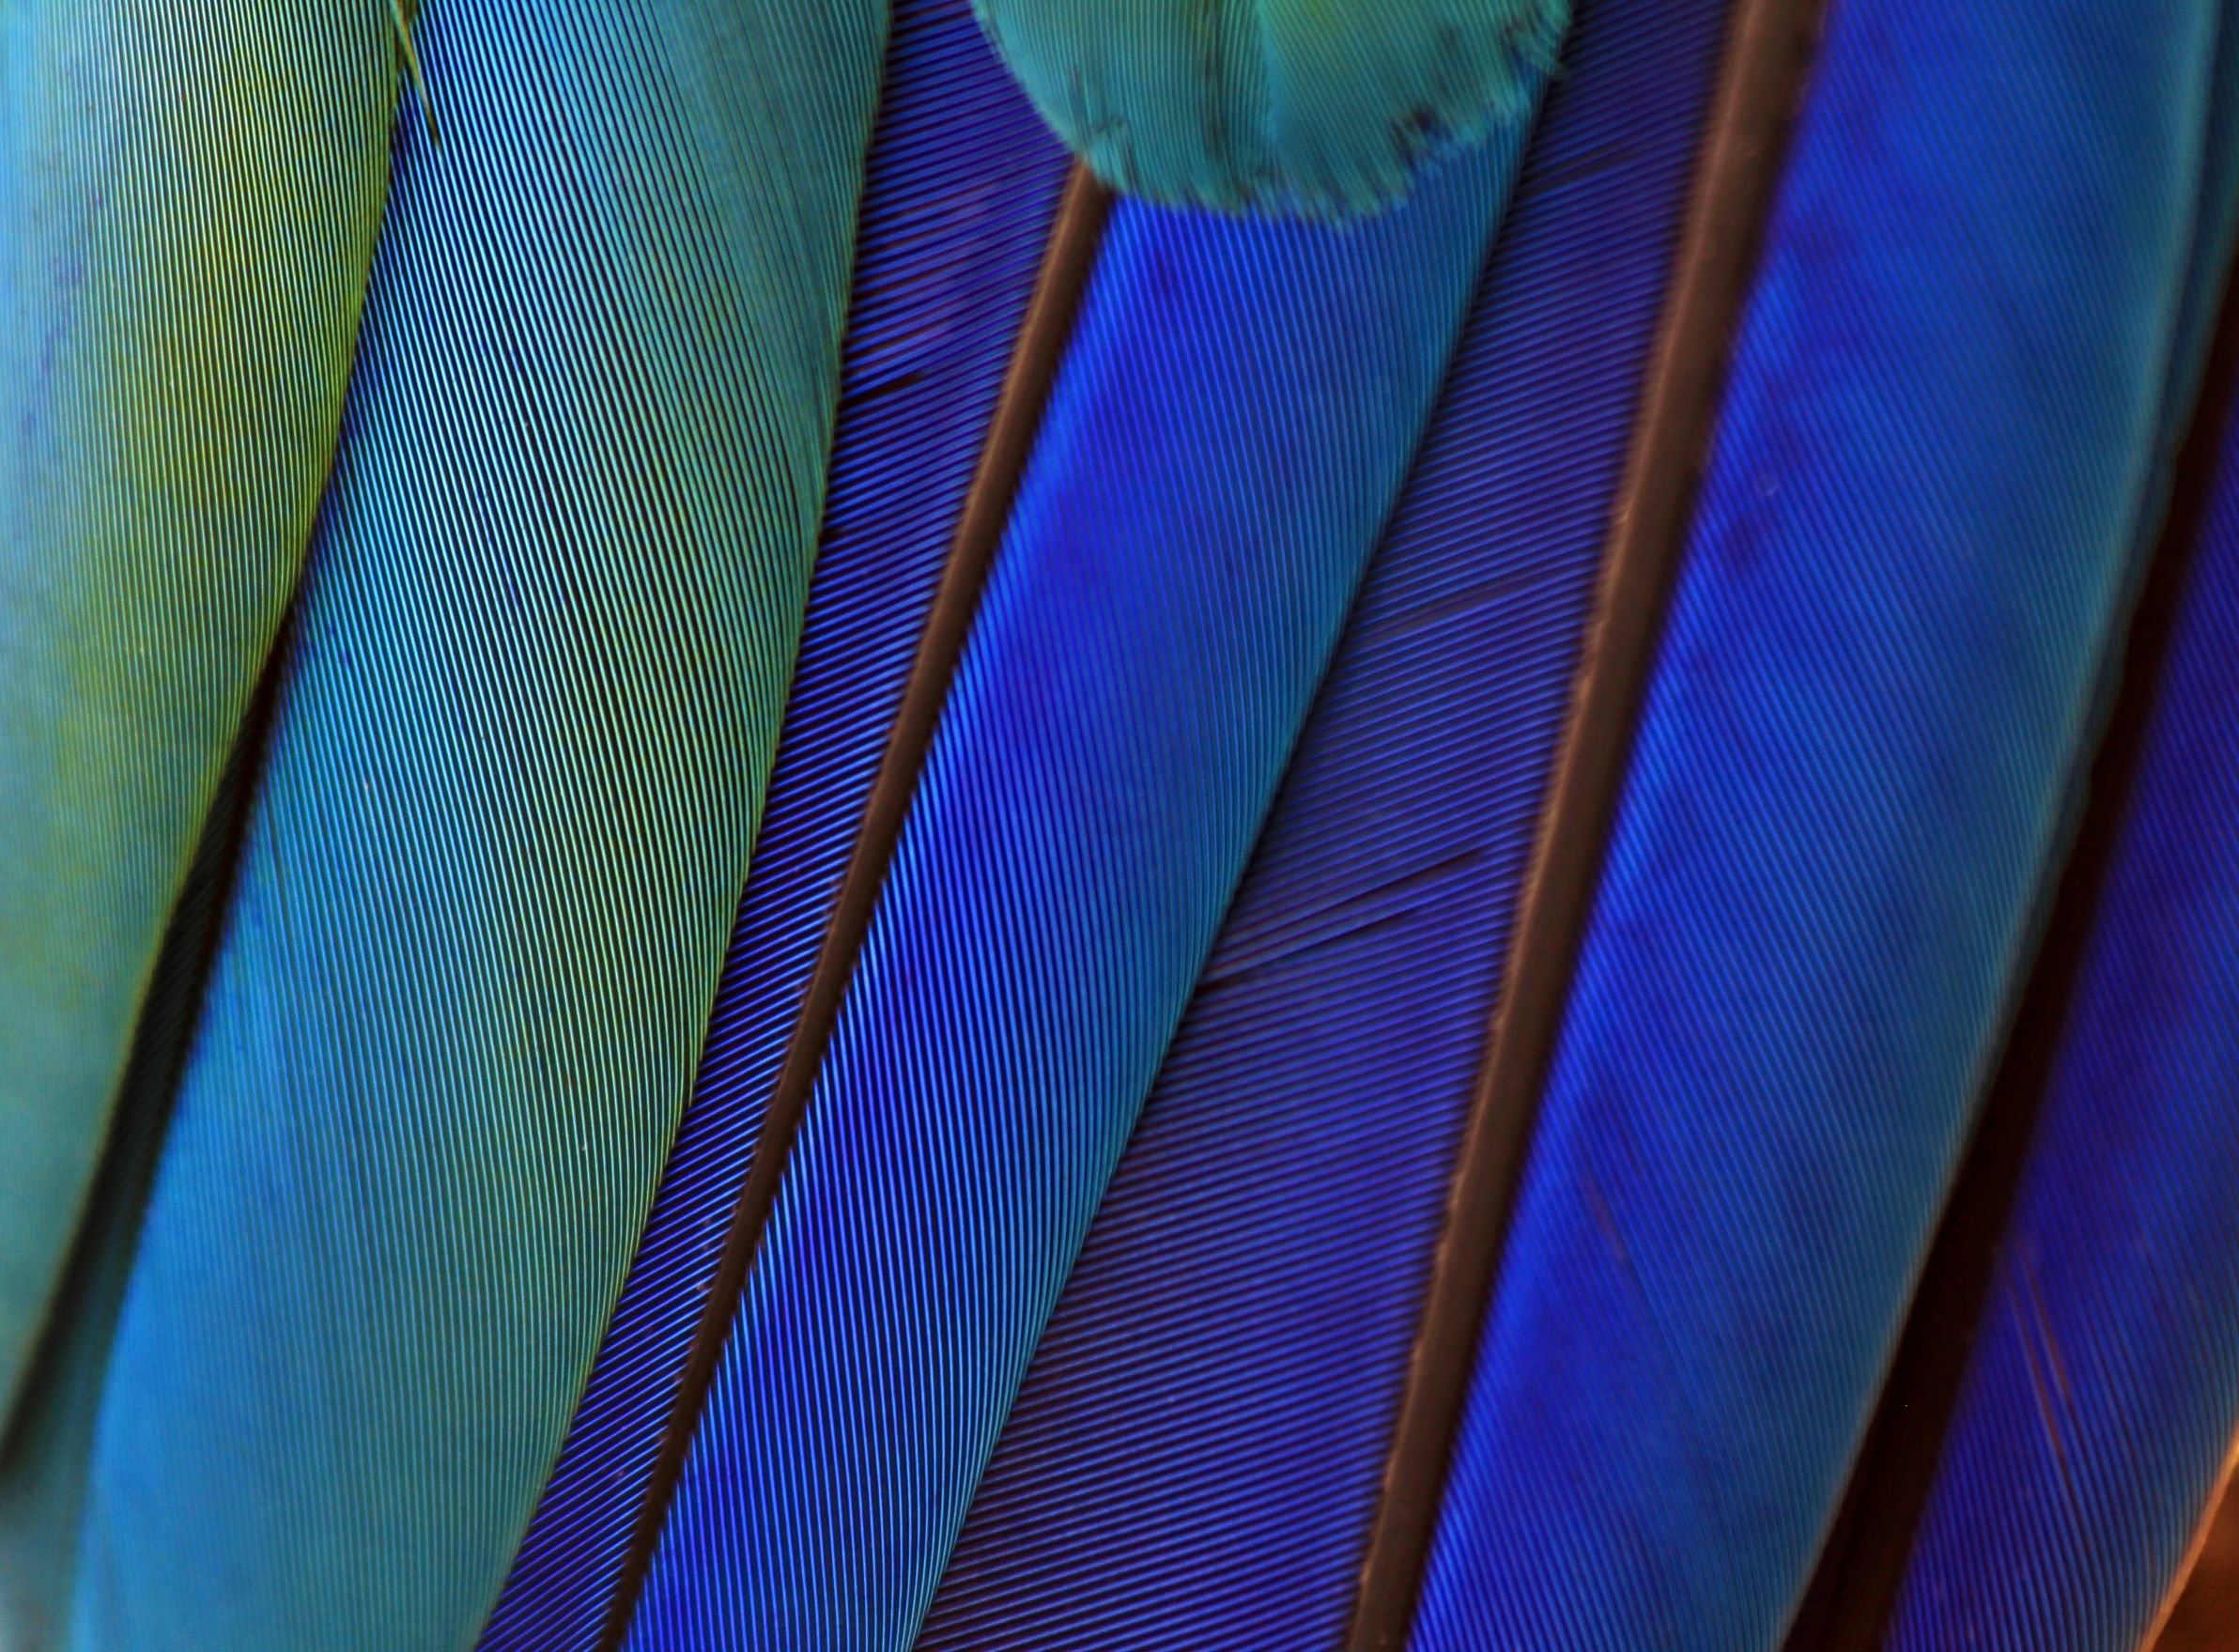 Total portfolio approach front cover image peacock feather